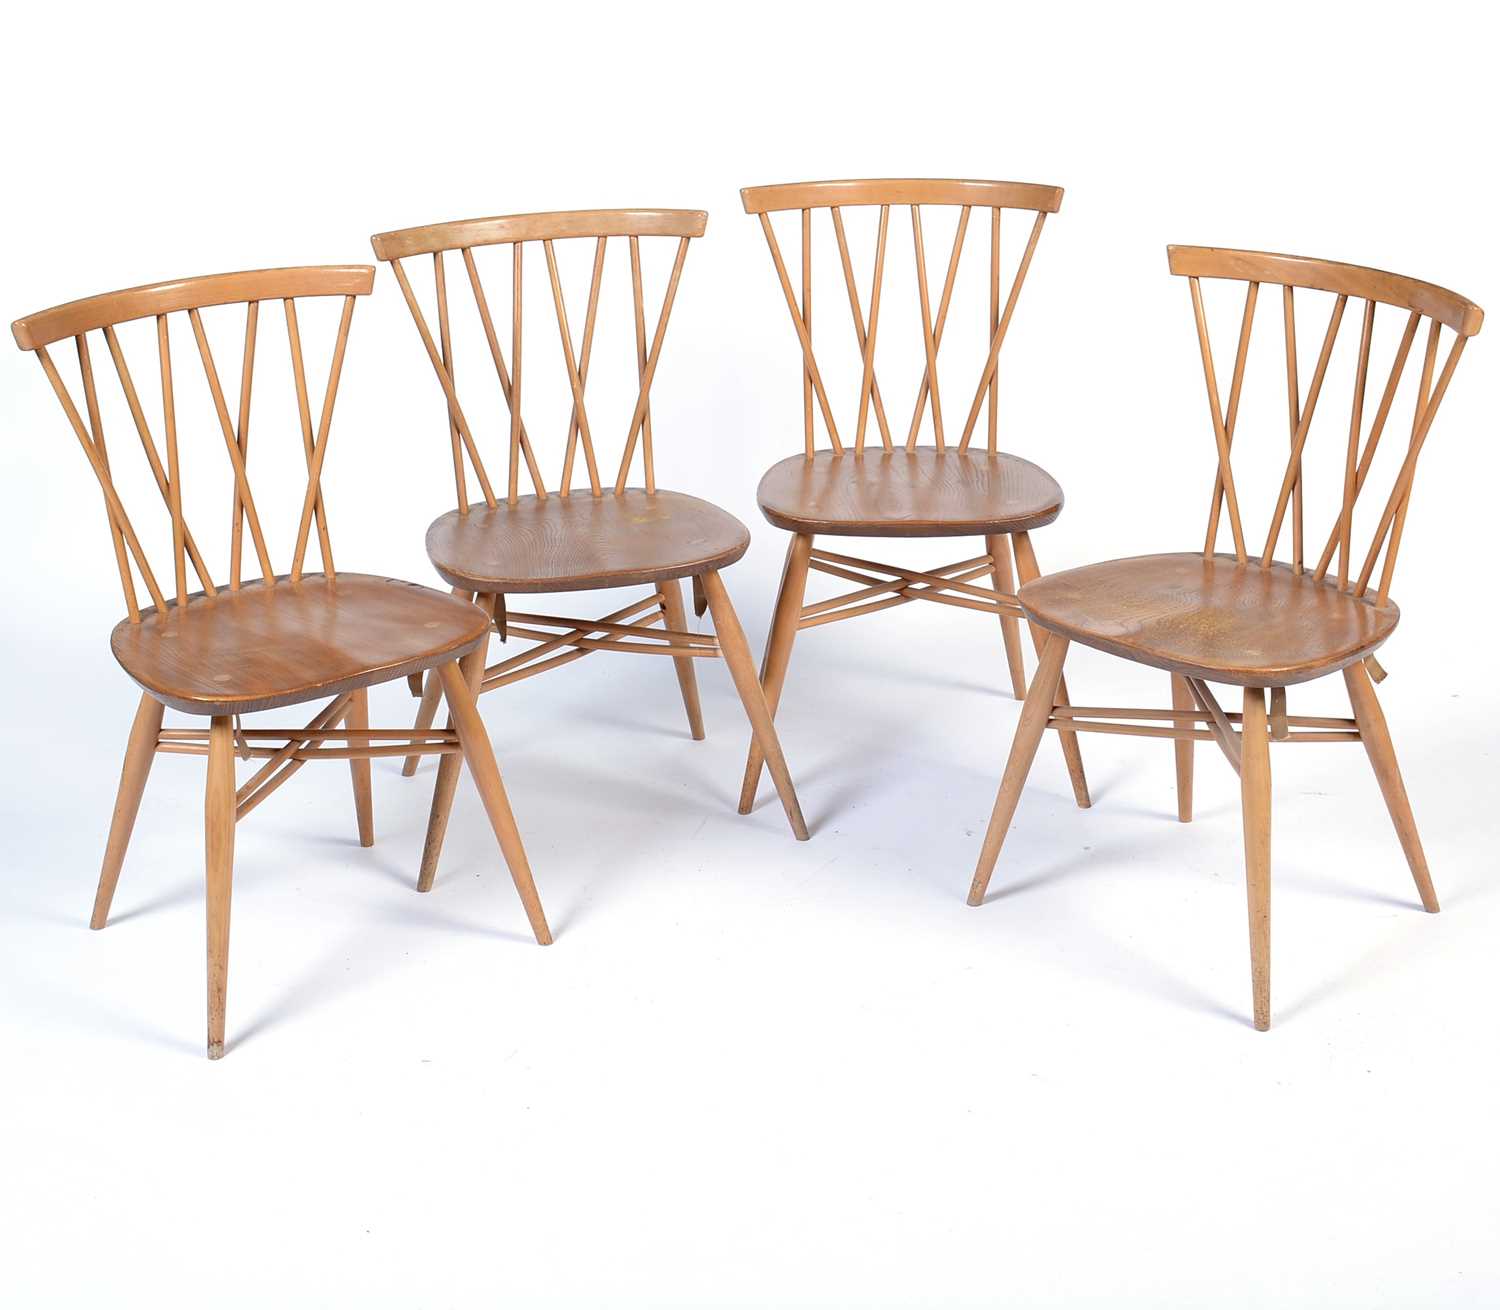 Ercol: four No. 376 Windsor latticed chairs; and two No. 369 Goldsmith Windsor chairs. - Image 10 of 16